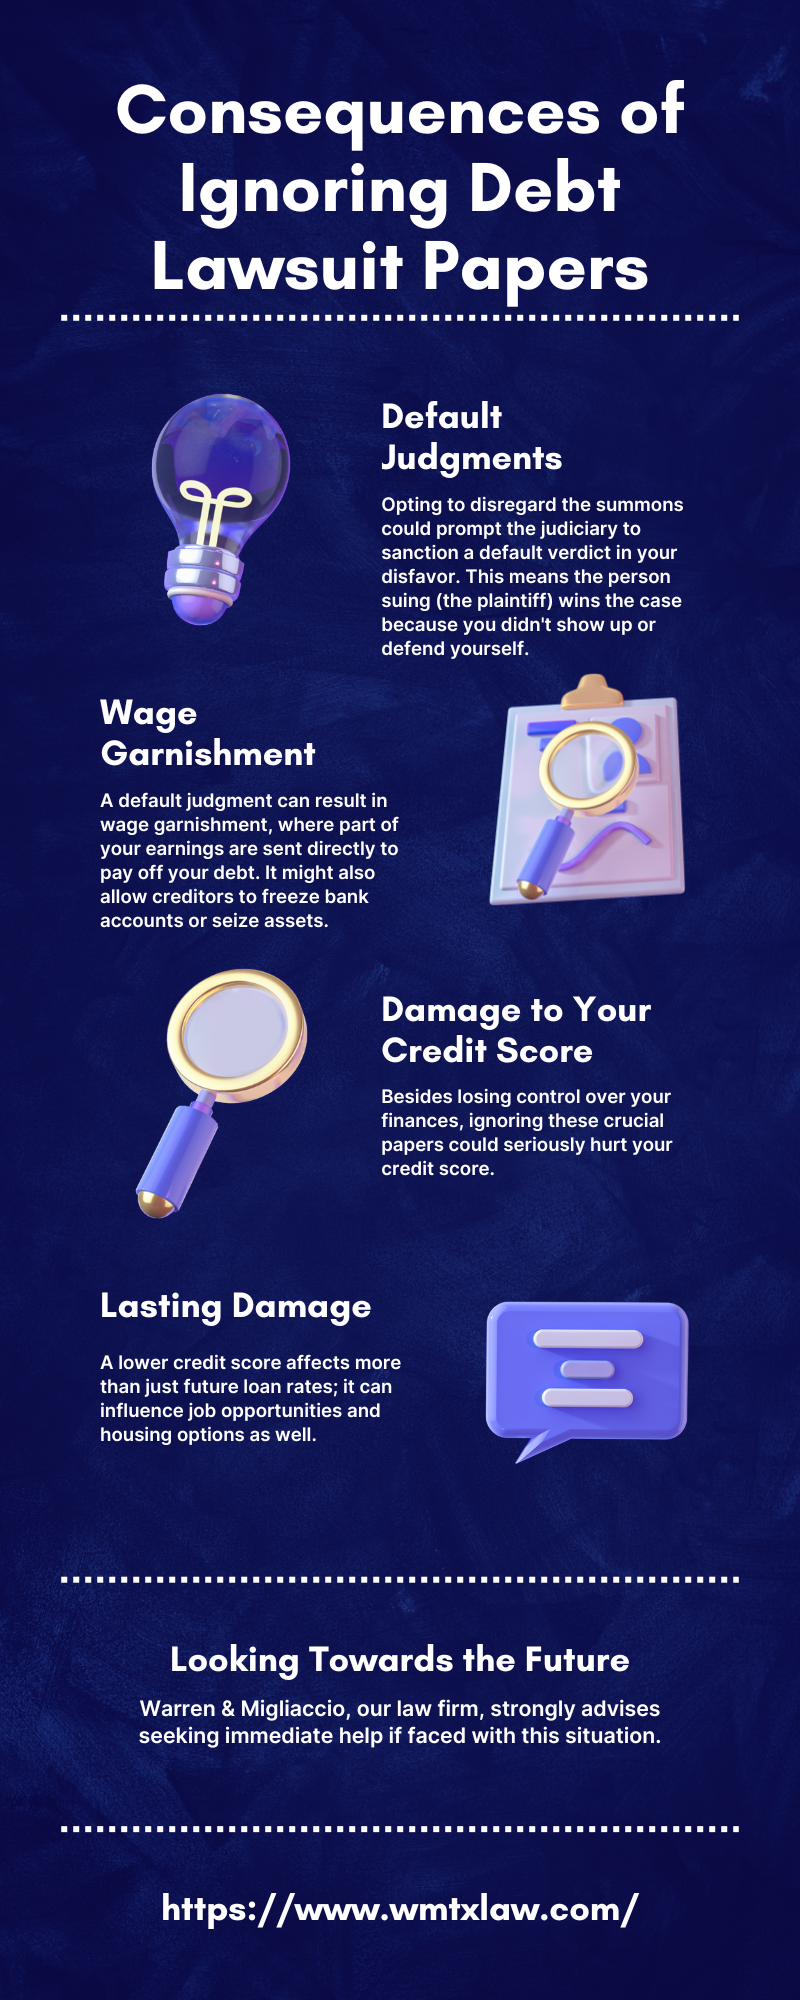 Infographic detailing the consequences of ignoring debt lawsuits in Texas including wage garnishment, damage to credit score, and lasting legal repercussions. Includes a law firm website link.